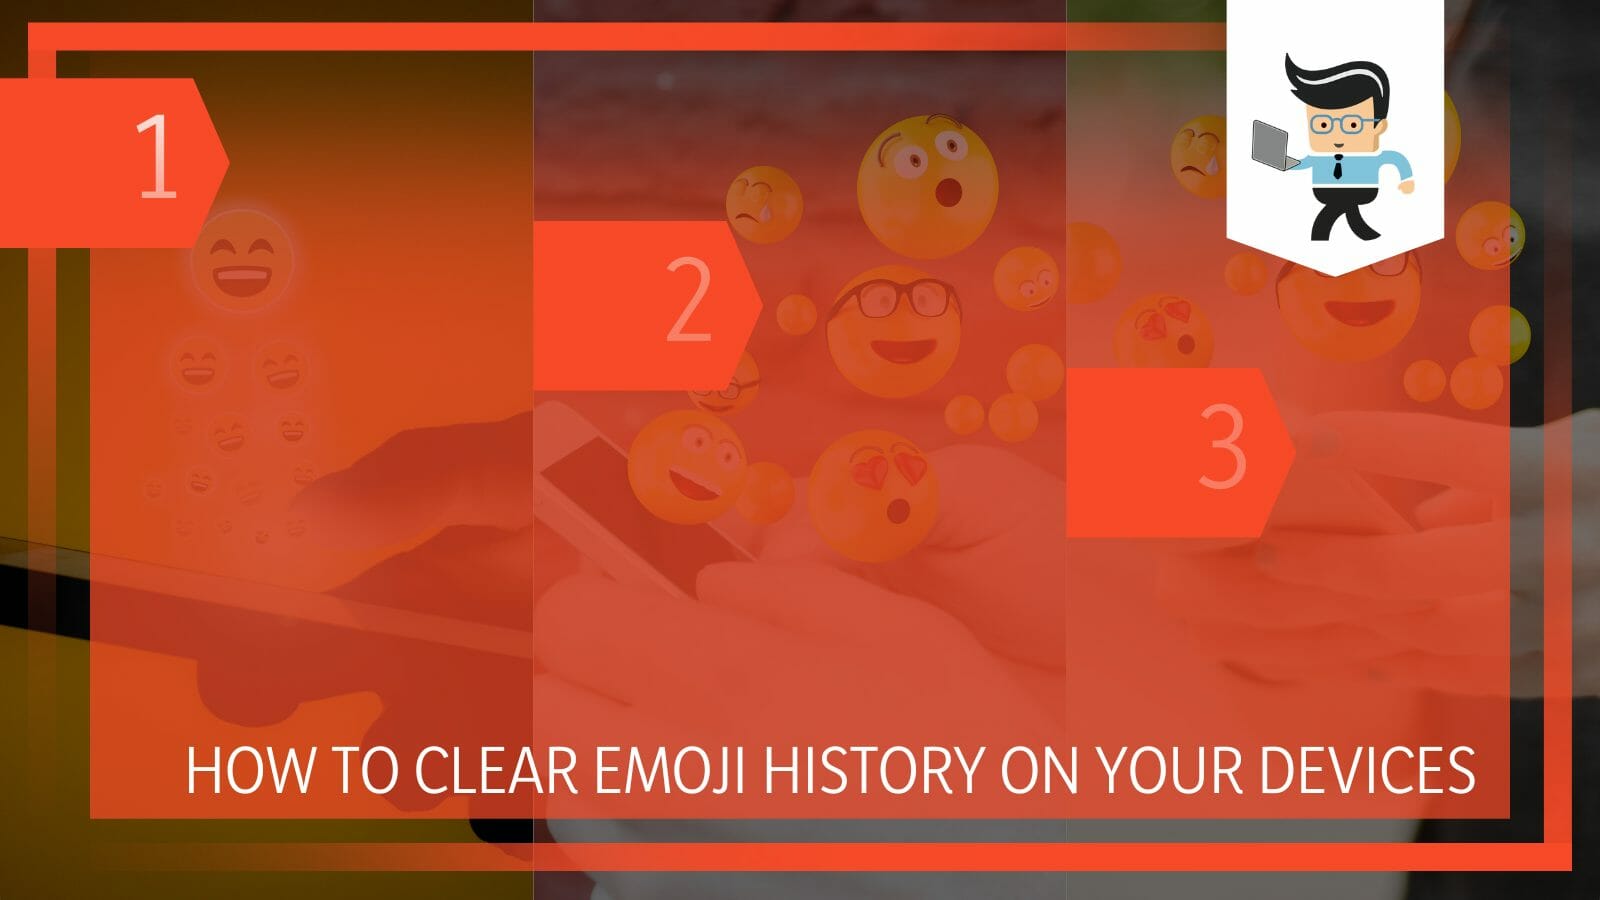 Clear Emoji History on Your Devices